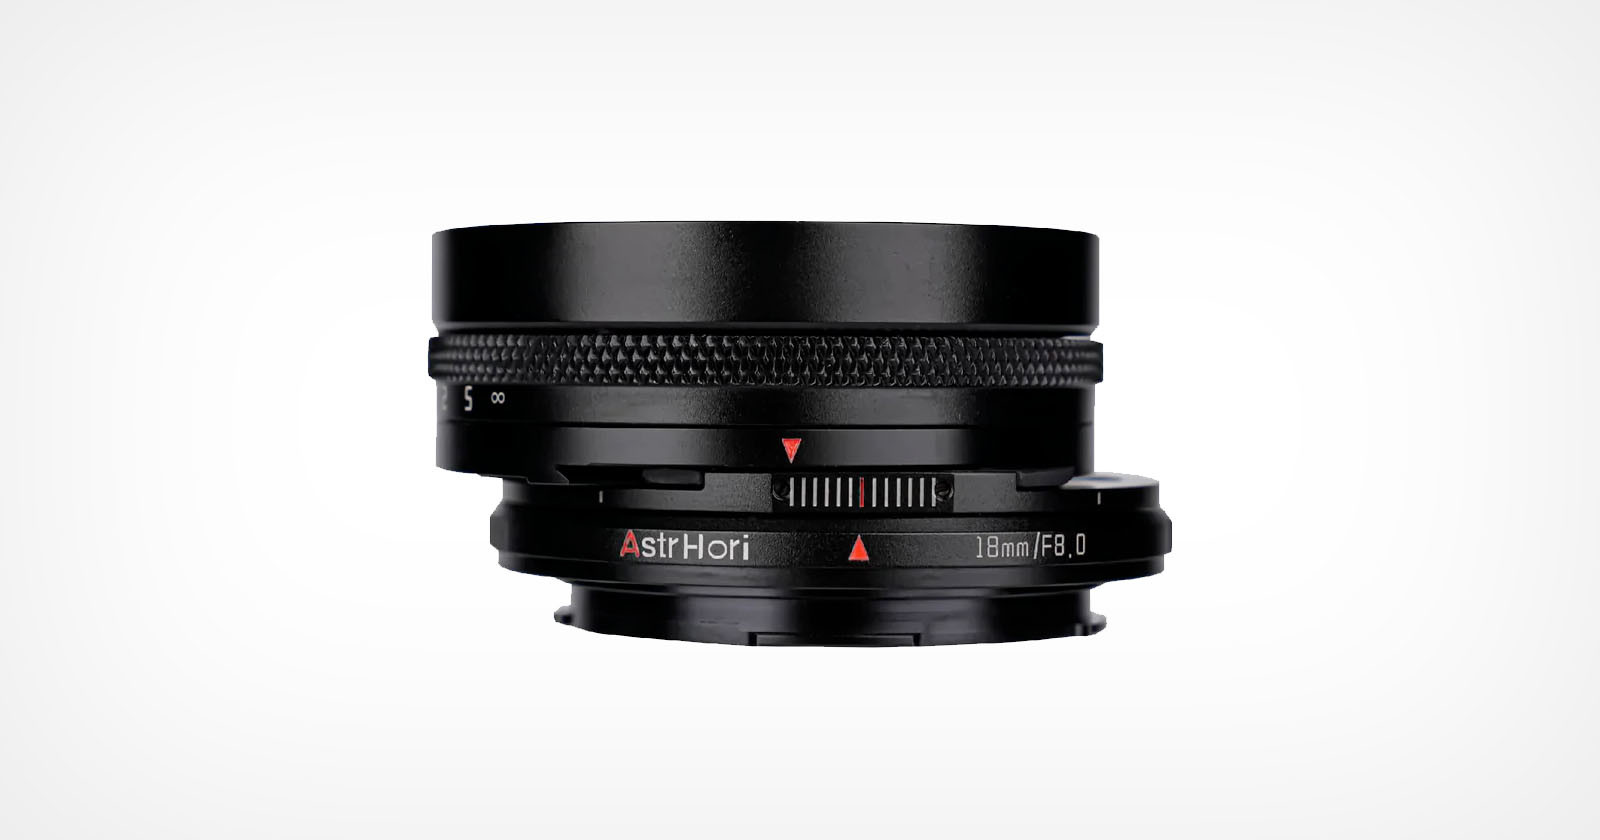  astrhori 18mm shift puck-sized lens architecture 